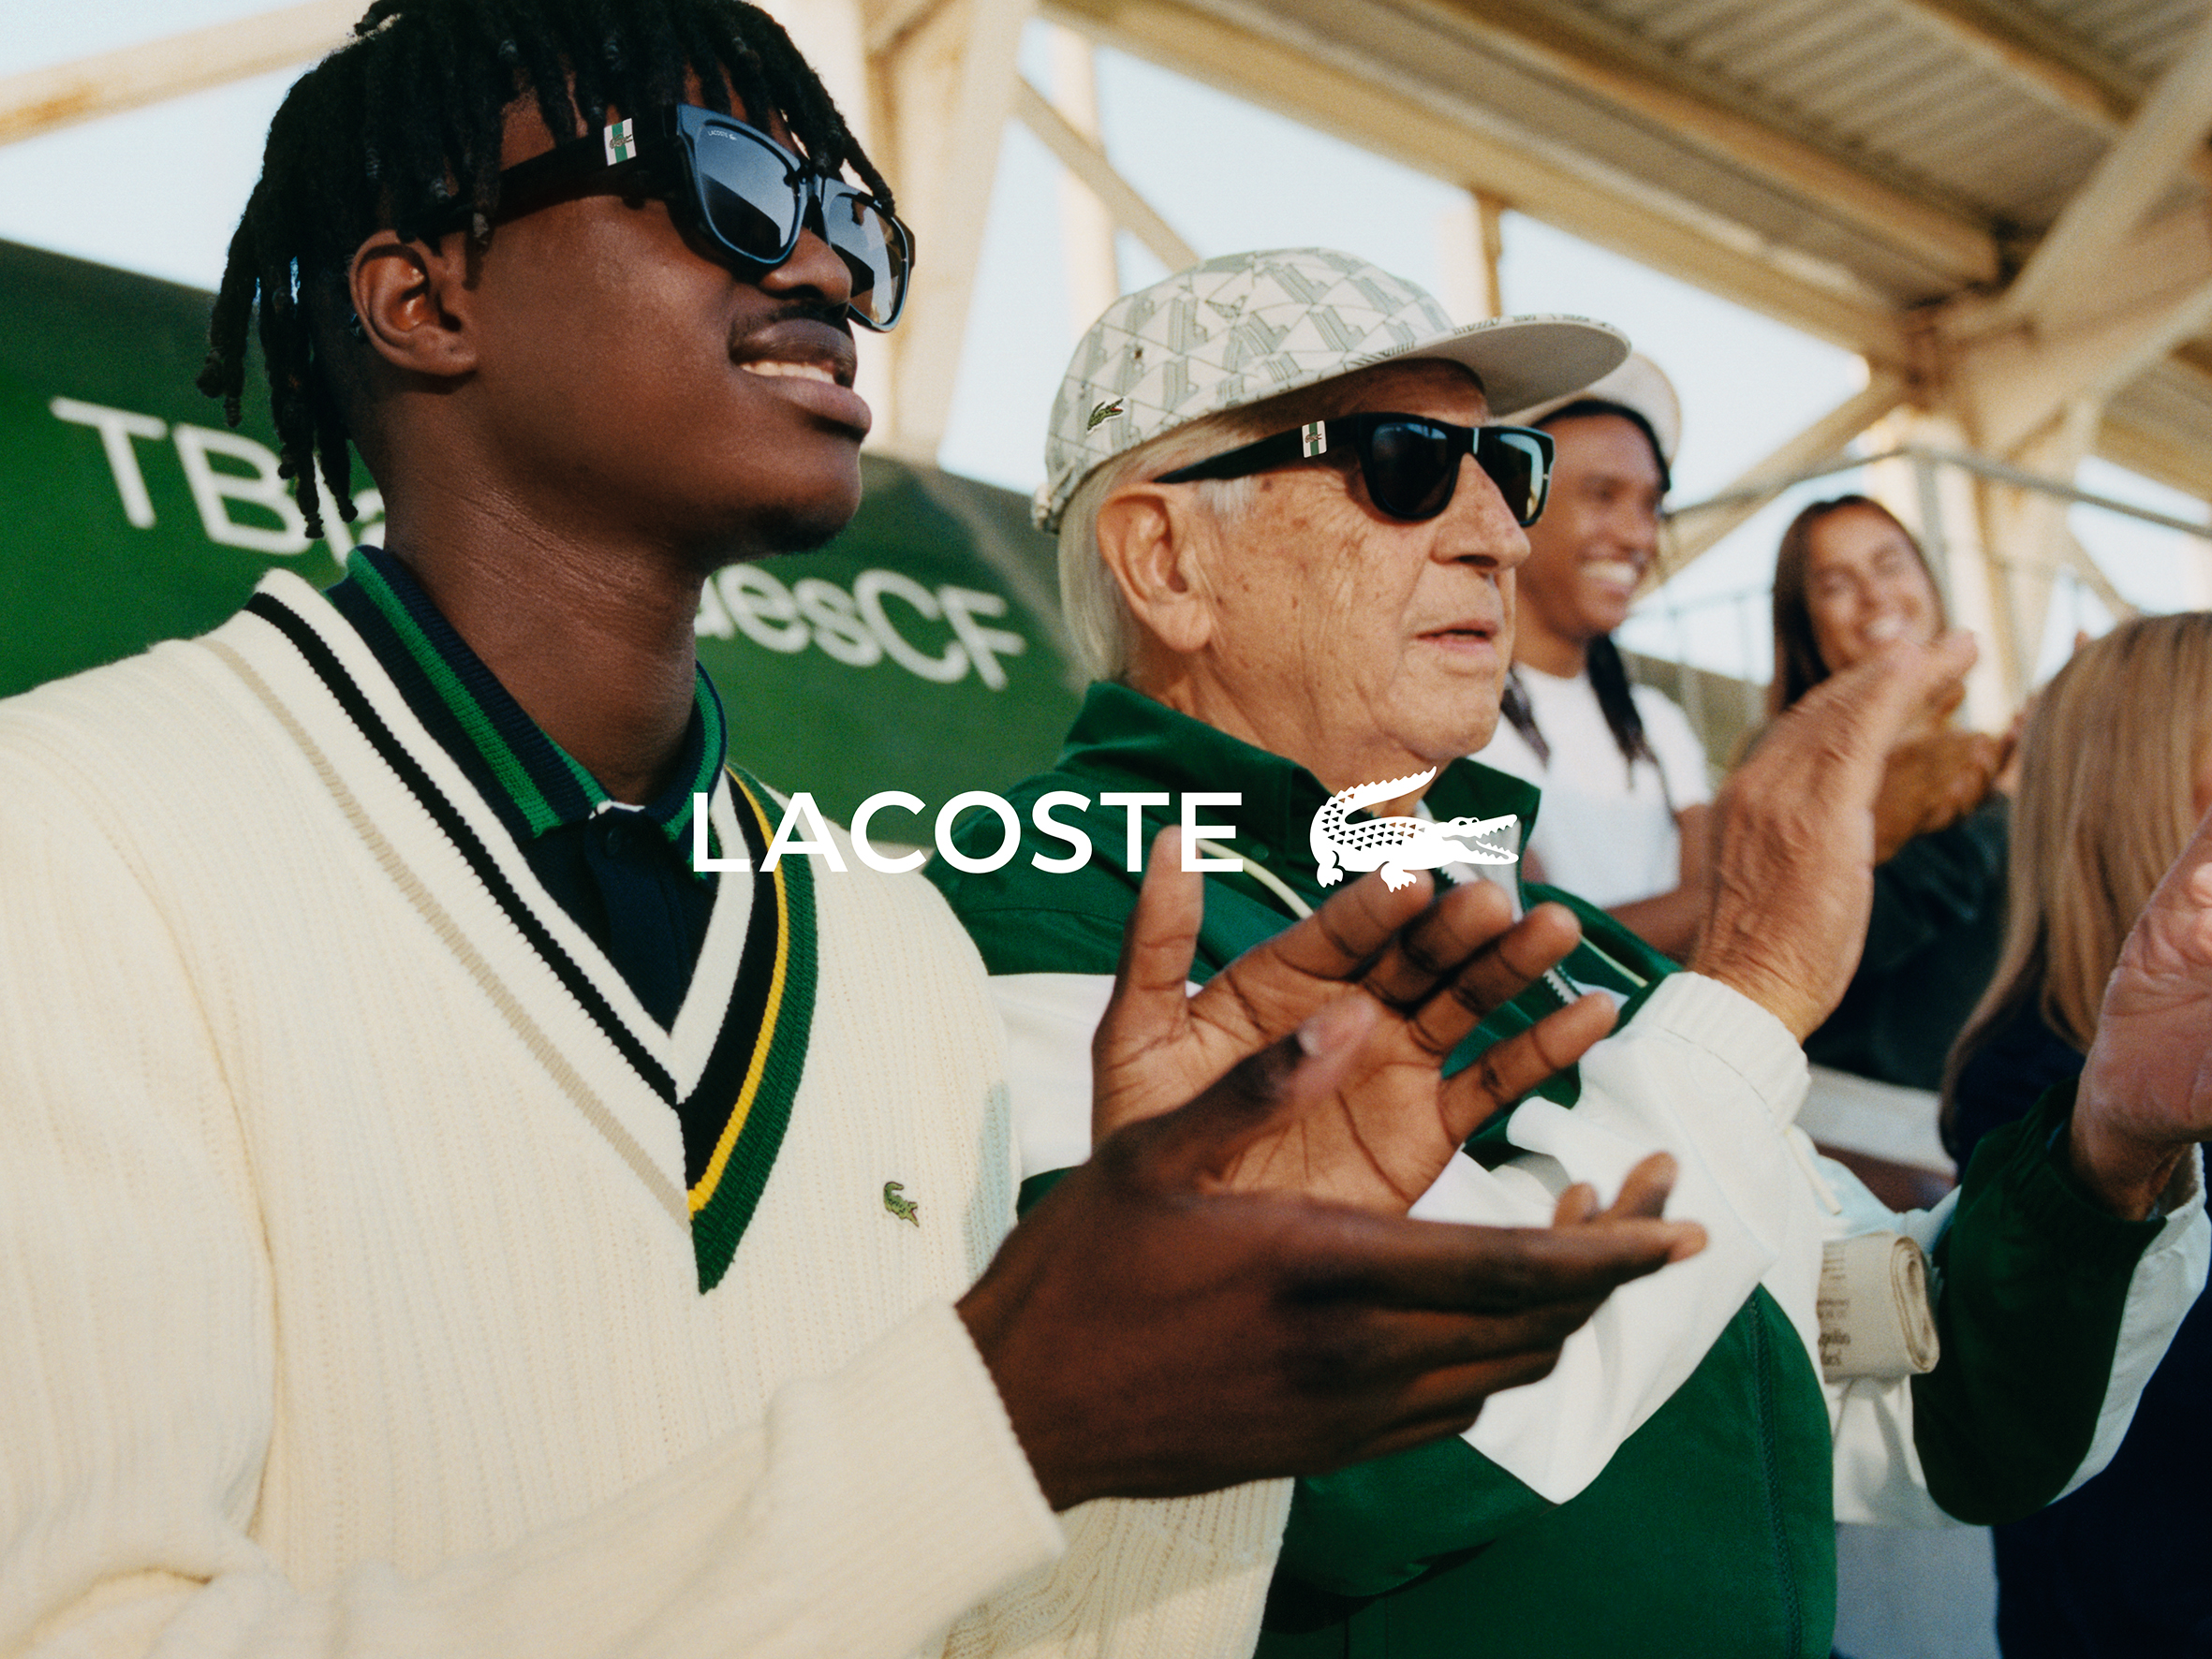 Lacoste Celebrates Unexpected Encounters in Its New Brand Campaign